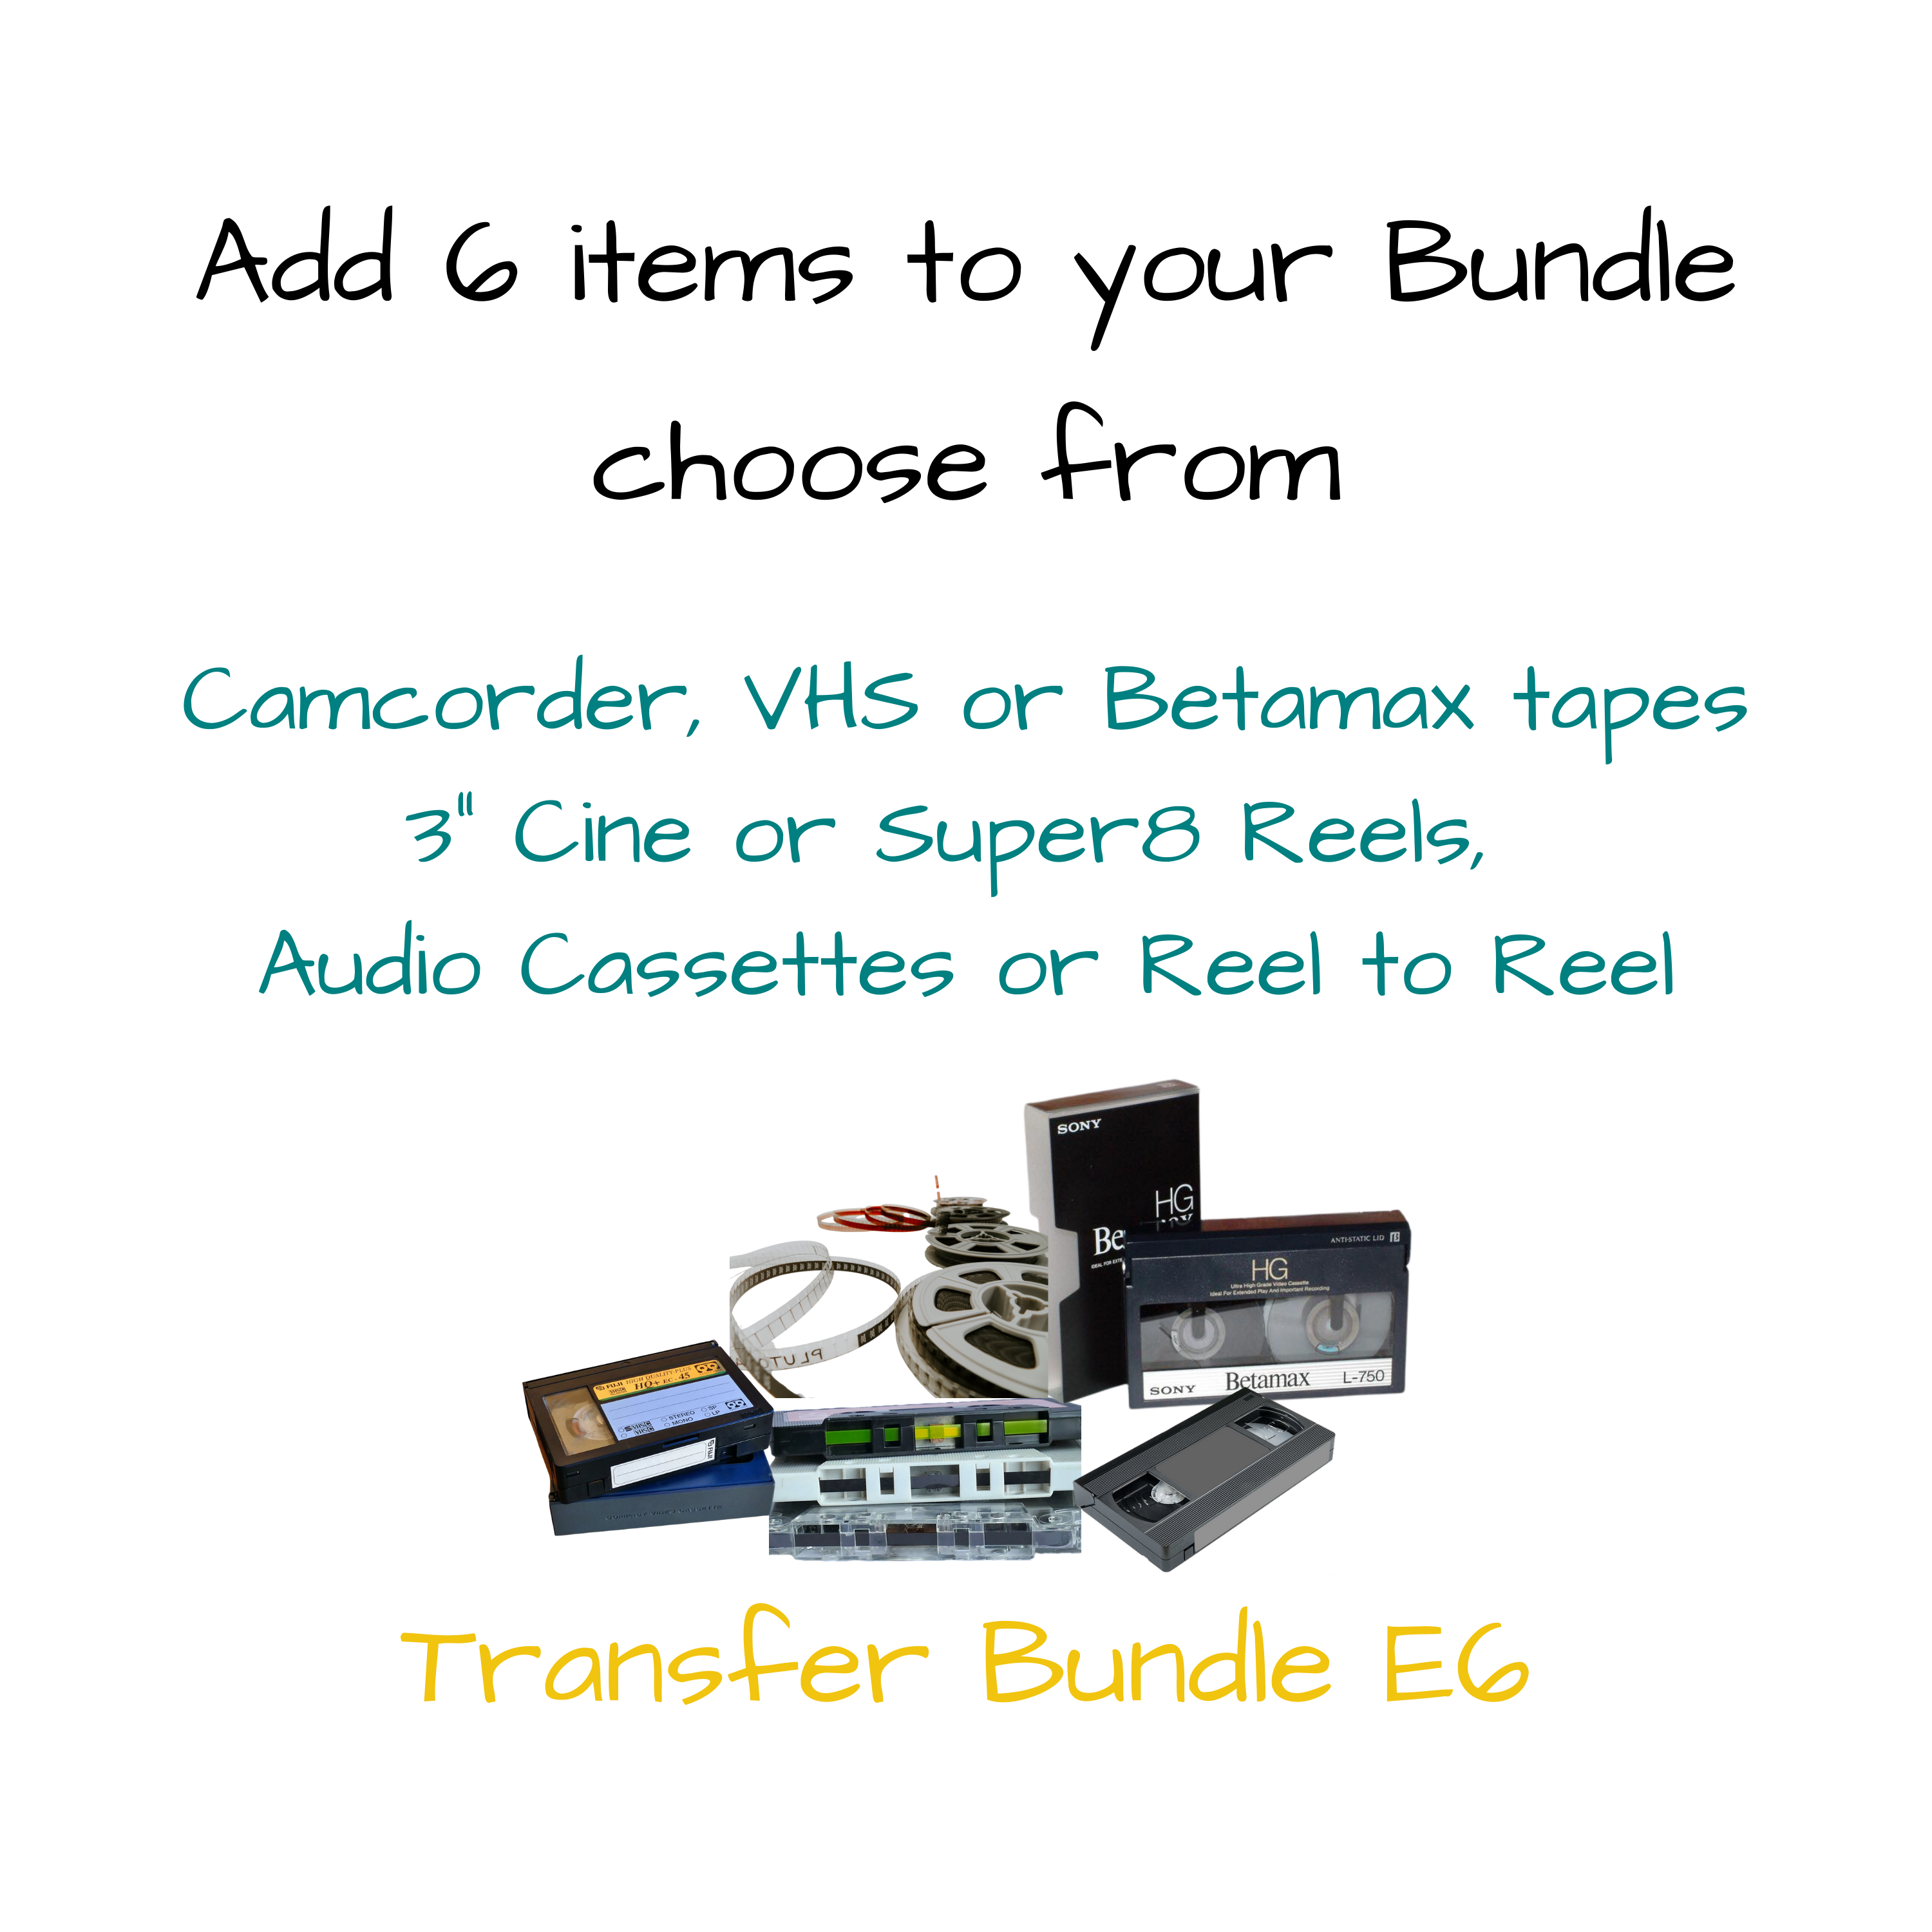 Transfer Bundle E6 : 6 Tapes, 3 Reels or Audio